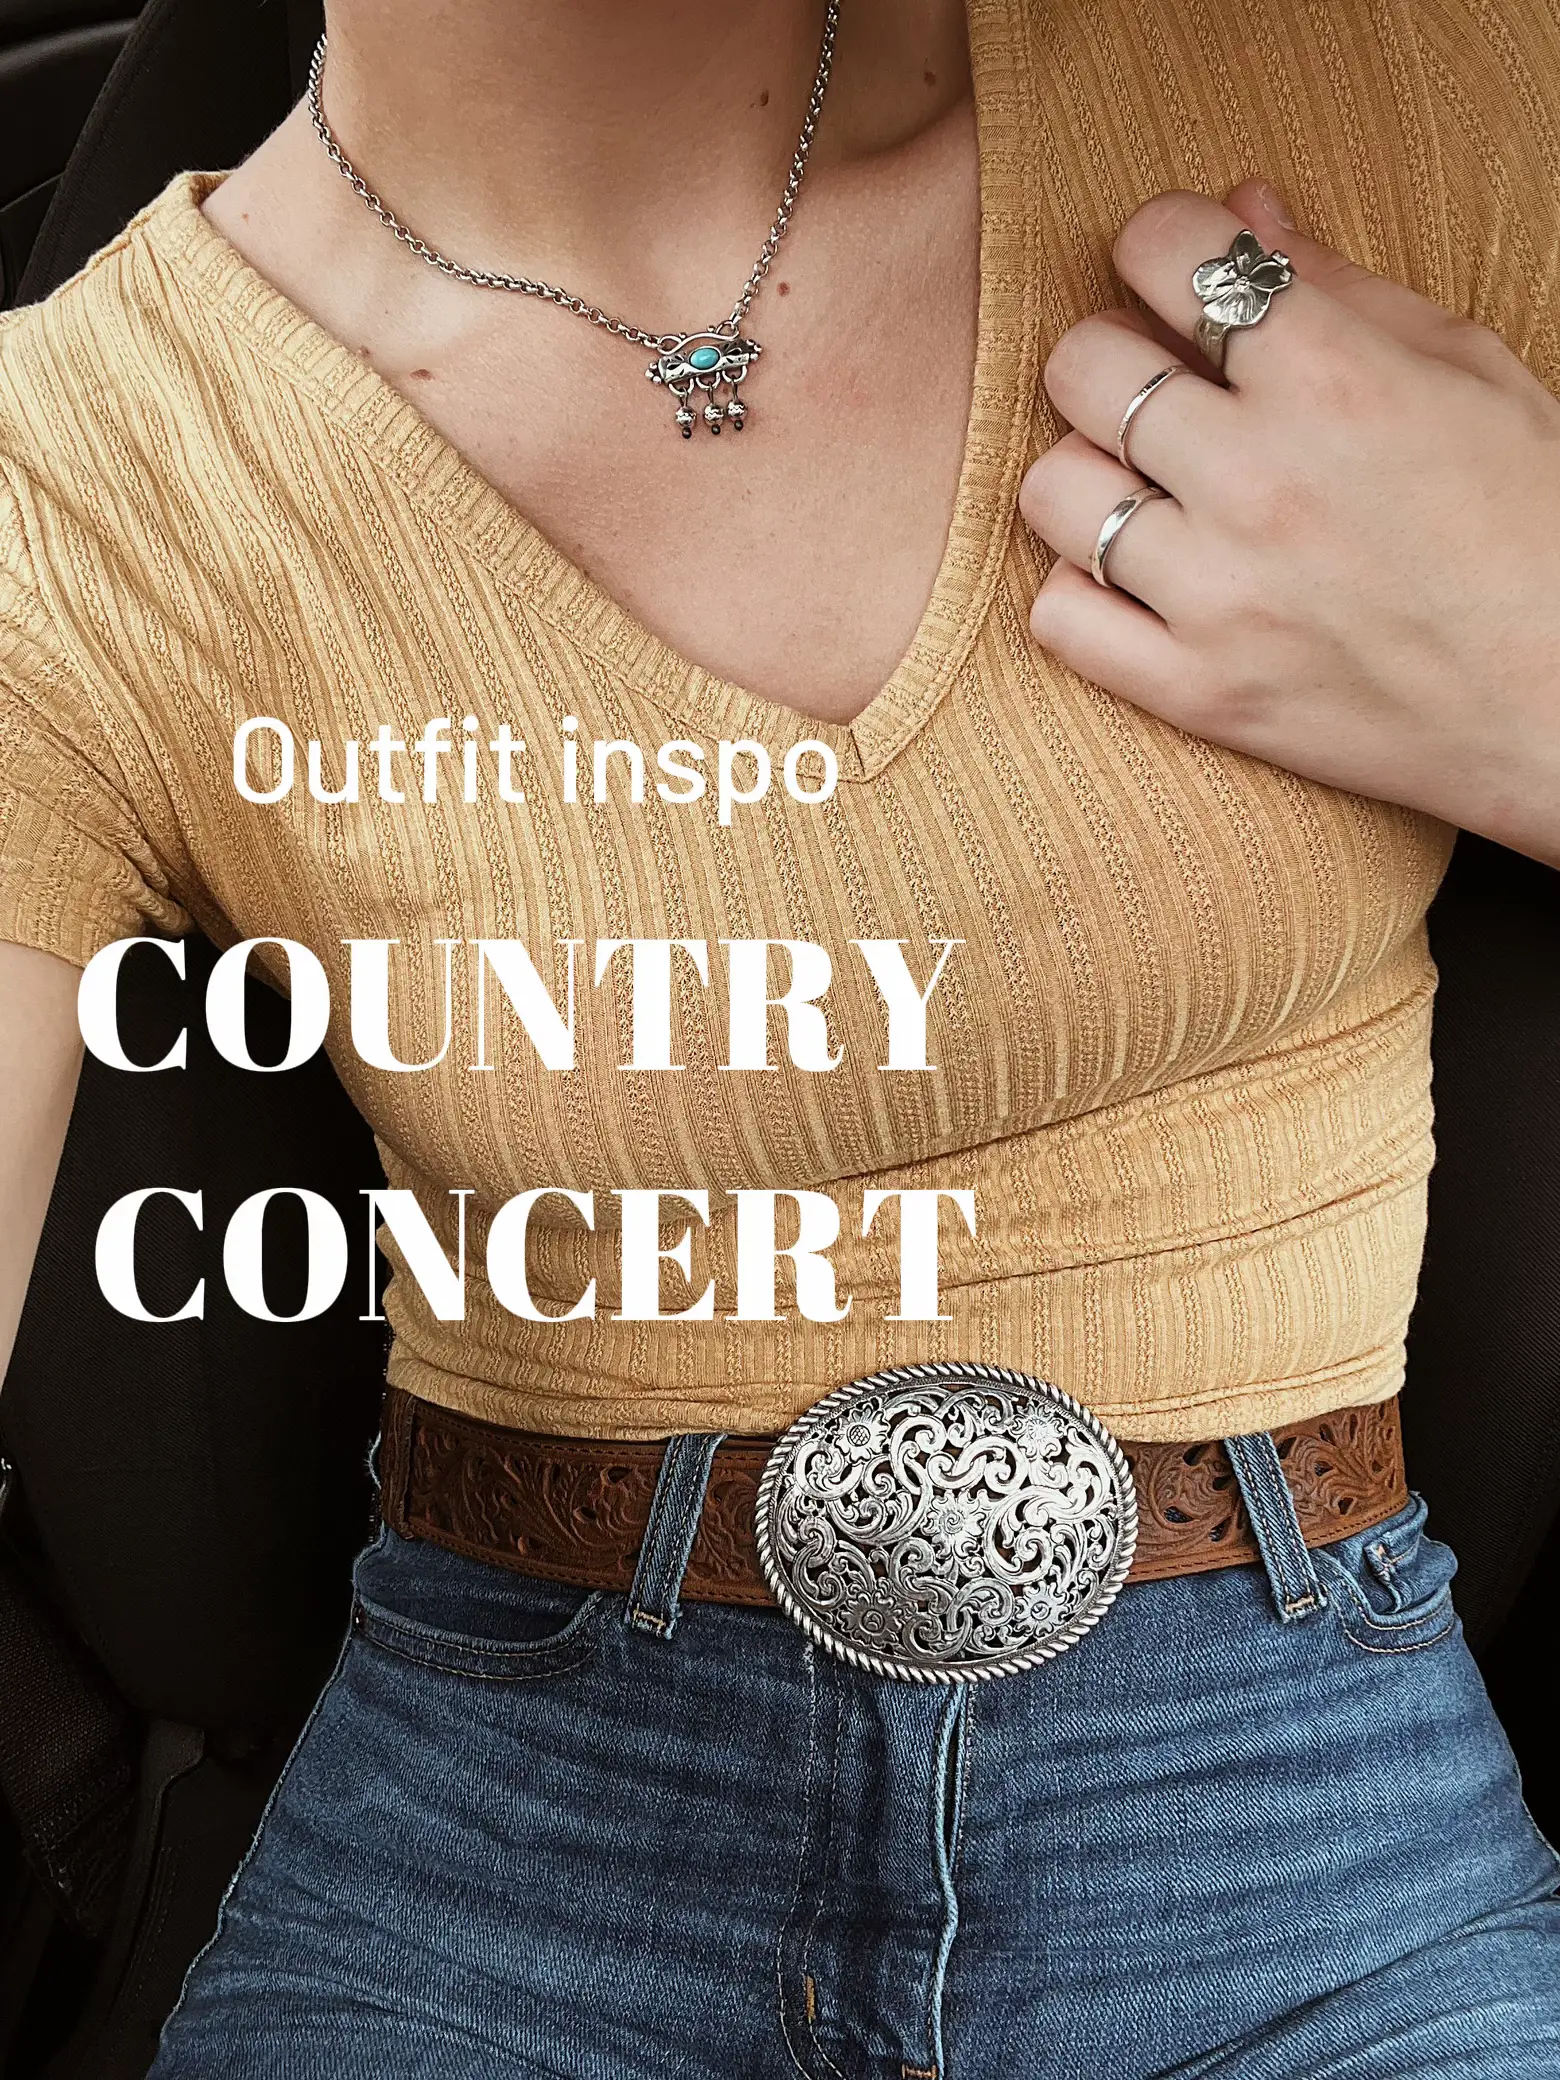 COUNTRY CONCERT's images